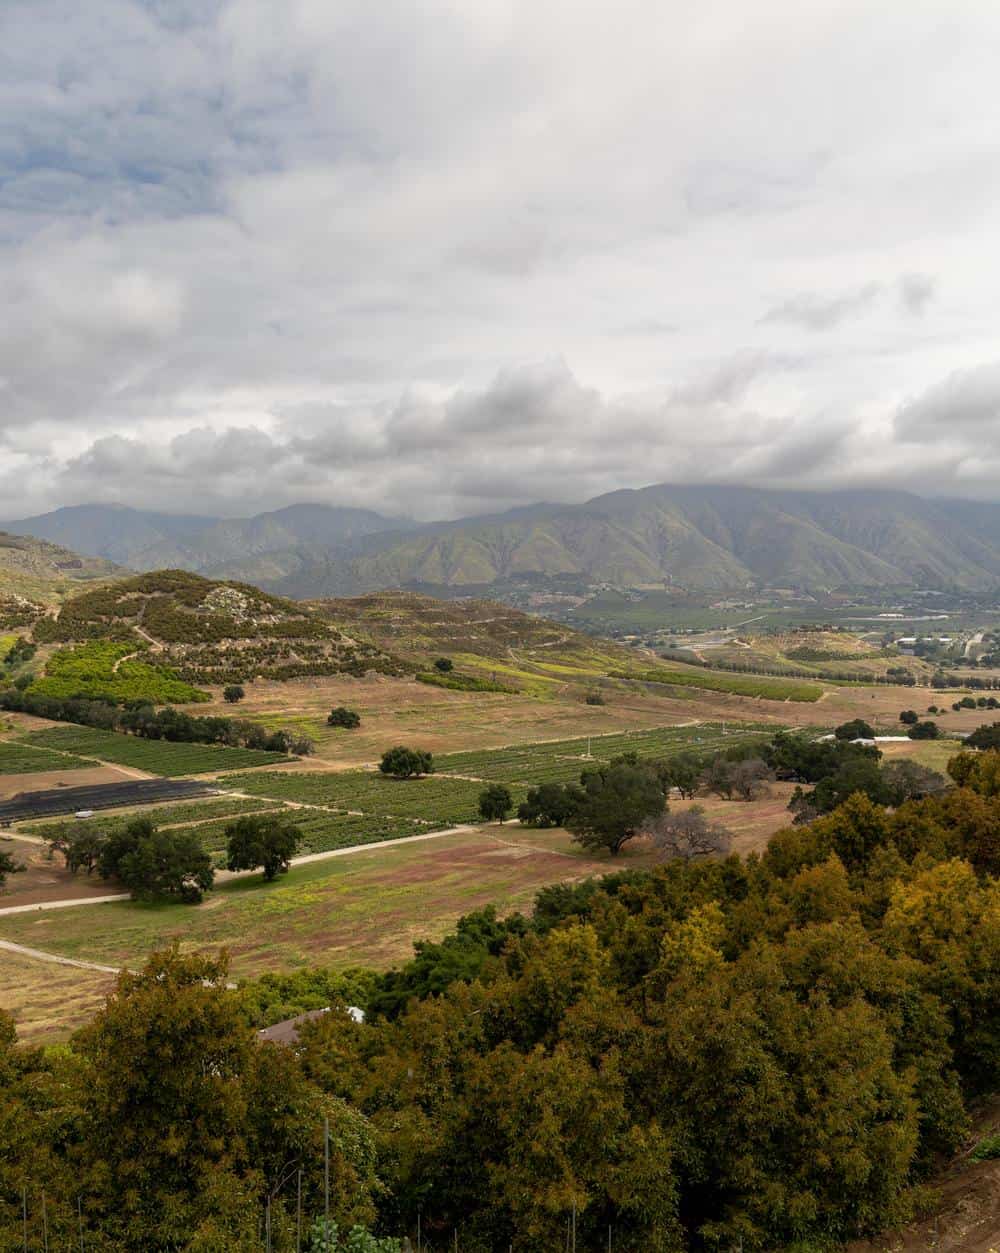 View of Pauma Valley, just outside of Temecula, where Fairfield Farms is located